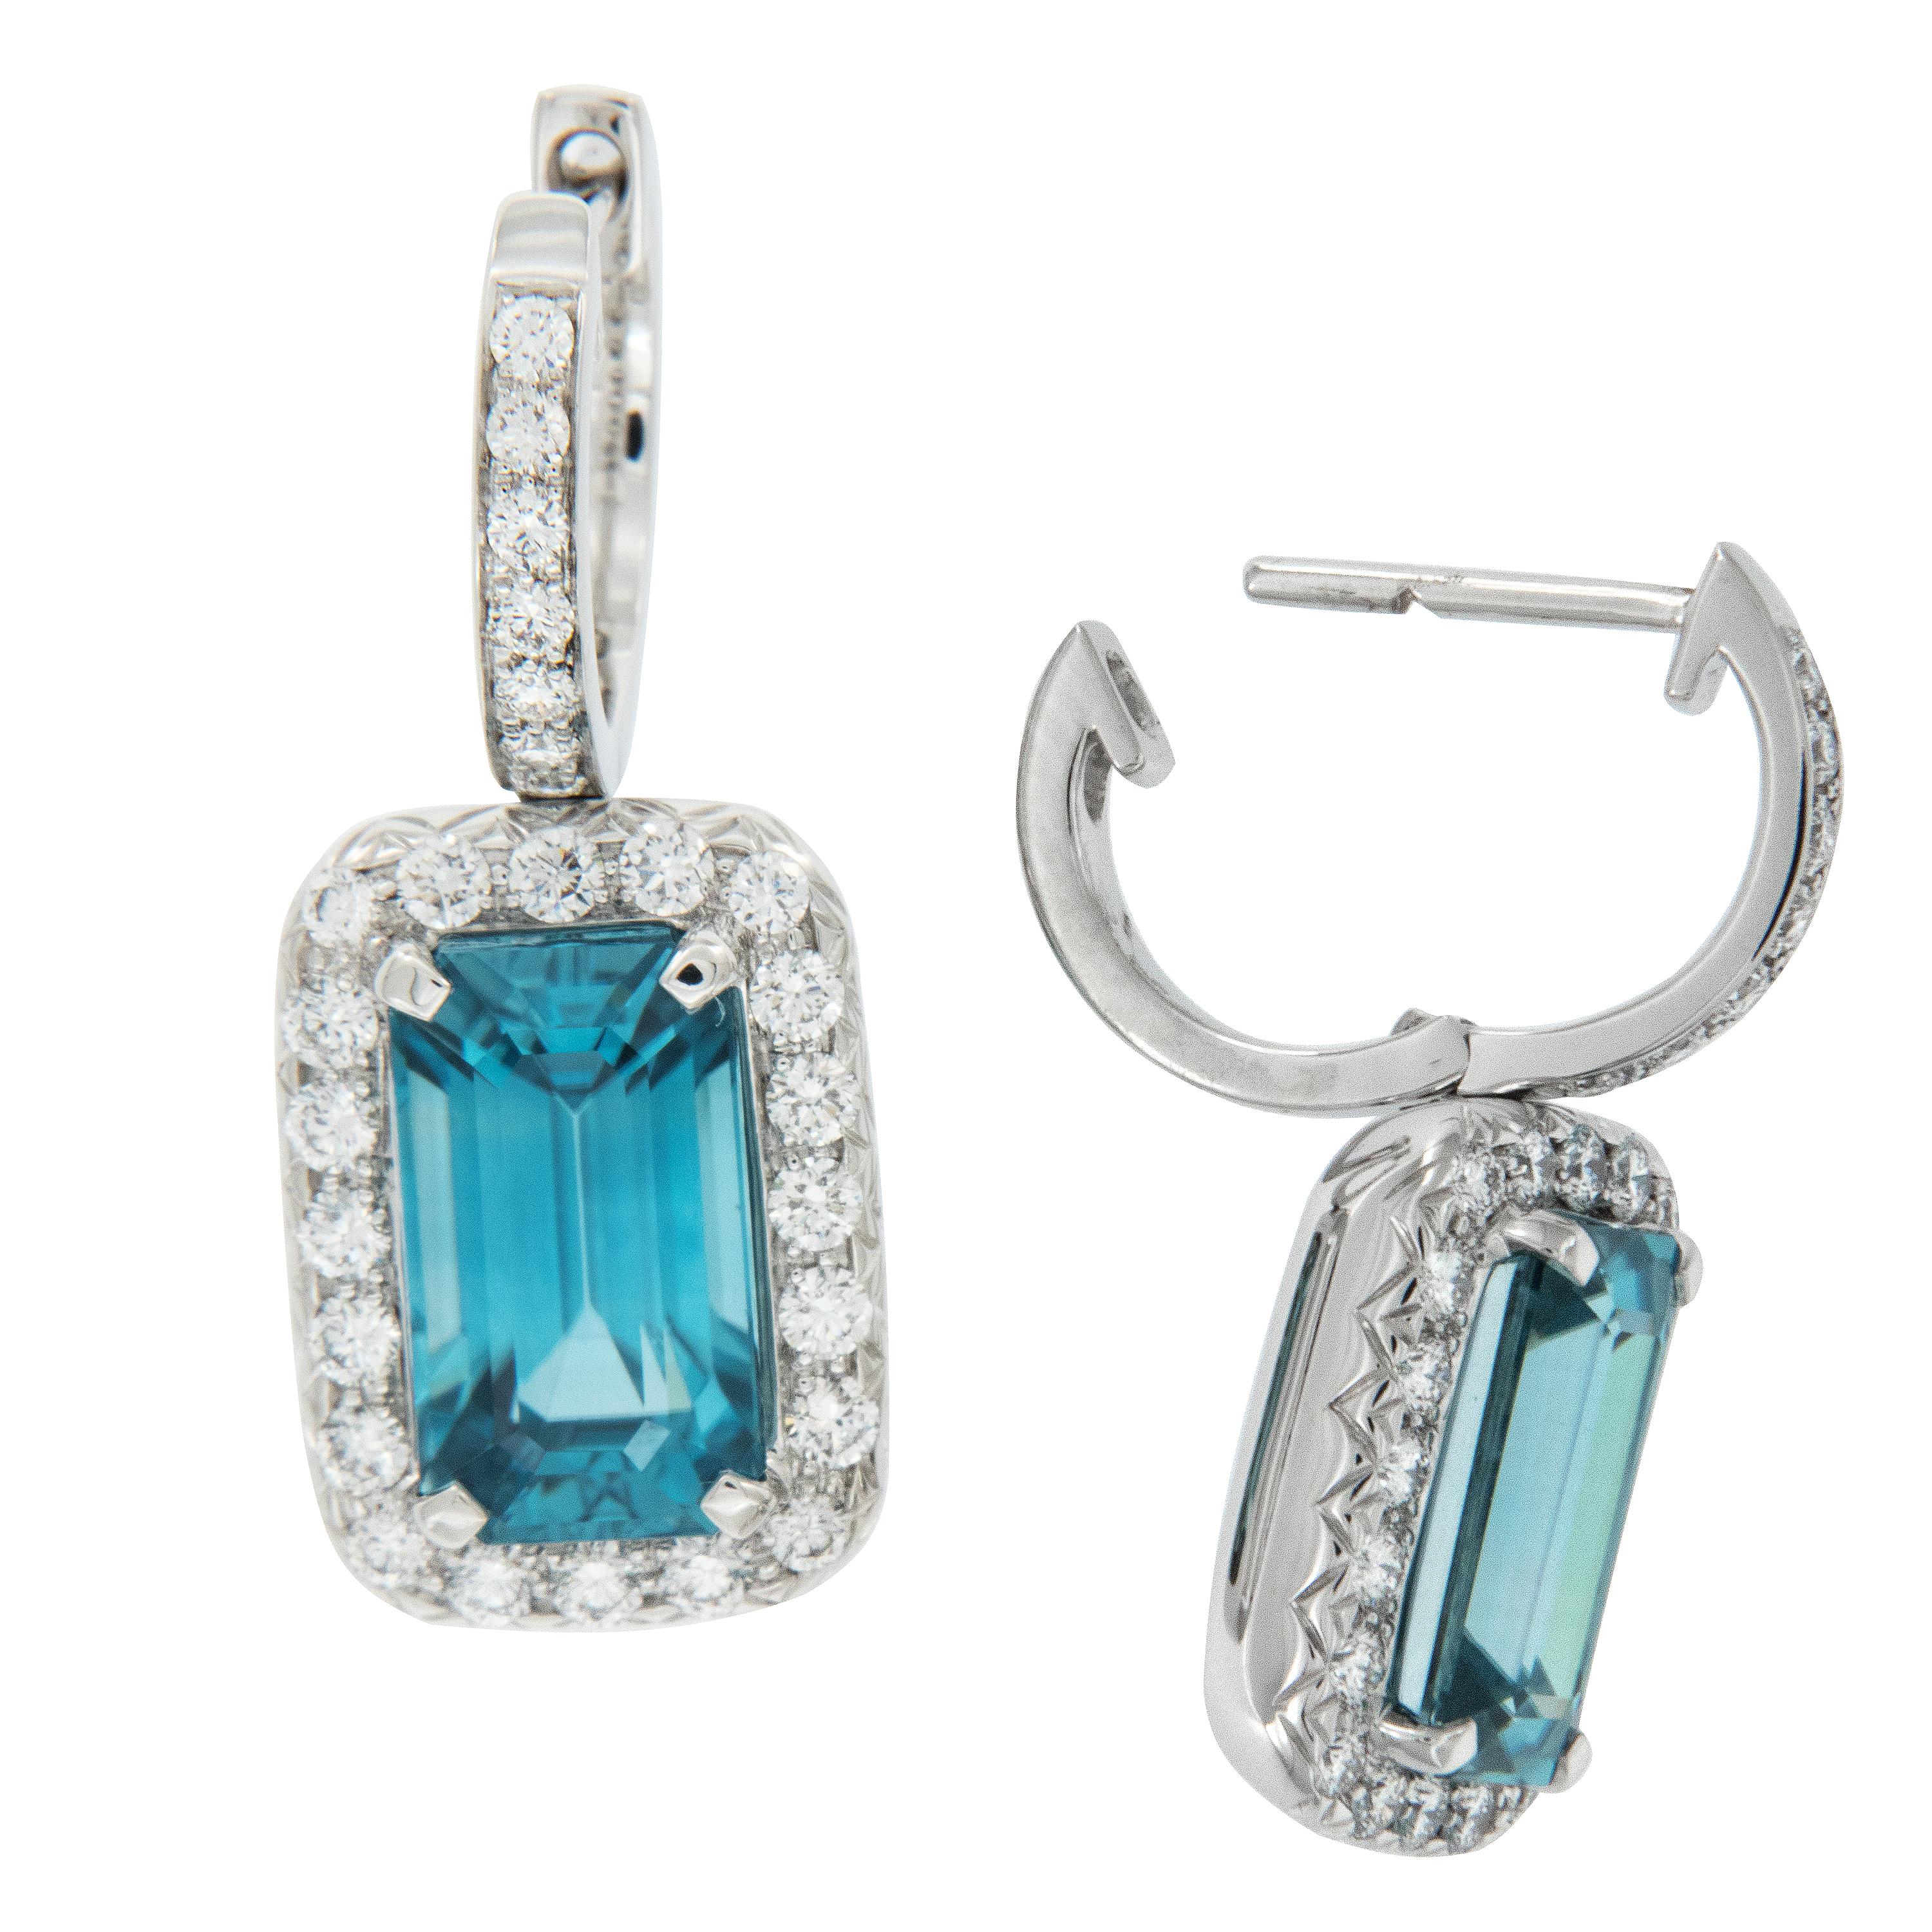 The vivid ocean blue of these exceptional blue zircons will transform you to a tranquil place! Expertly crafted in 18 karat white gold, these blue zircons (8.50 Cttw) are framed by 0.77 Cttw E-F color, VS clarity diamonds. Earrings dangle to catch